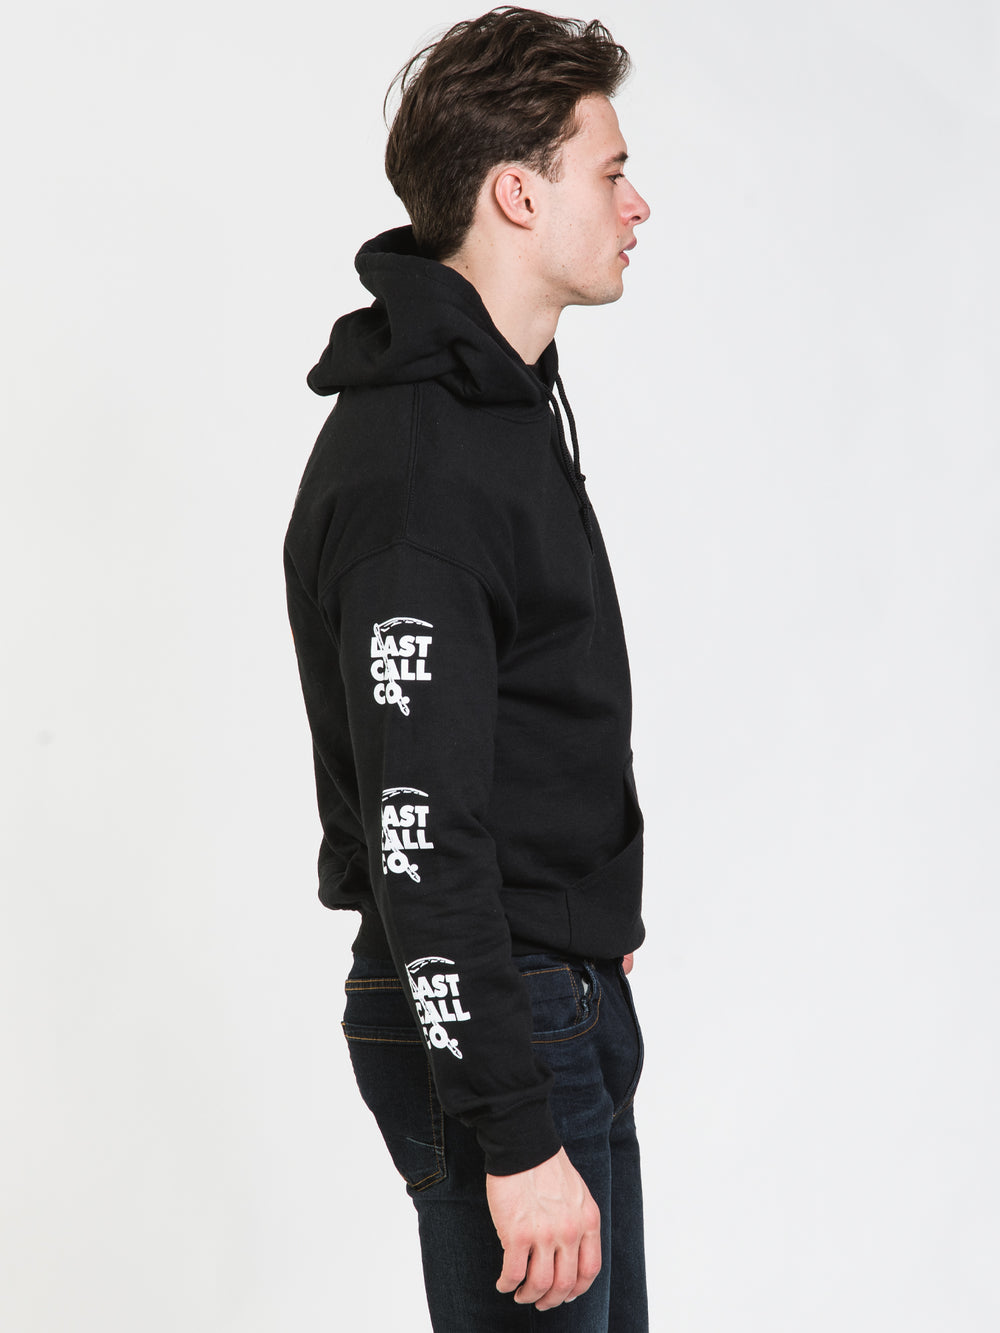 LAST CALL FIRE IT UP PULL OVER HOODIE - DÉSTOCKAGE